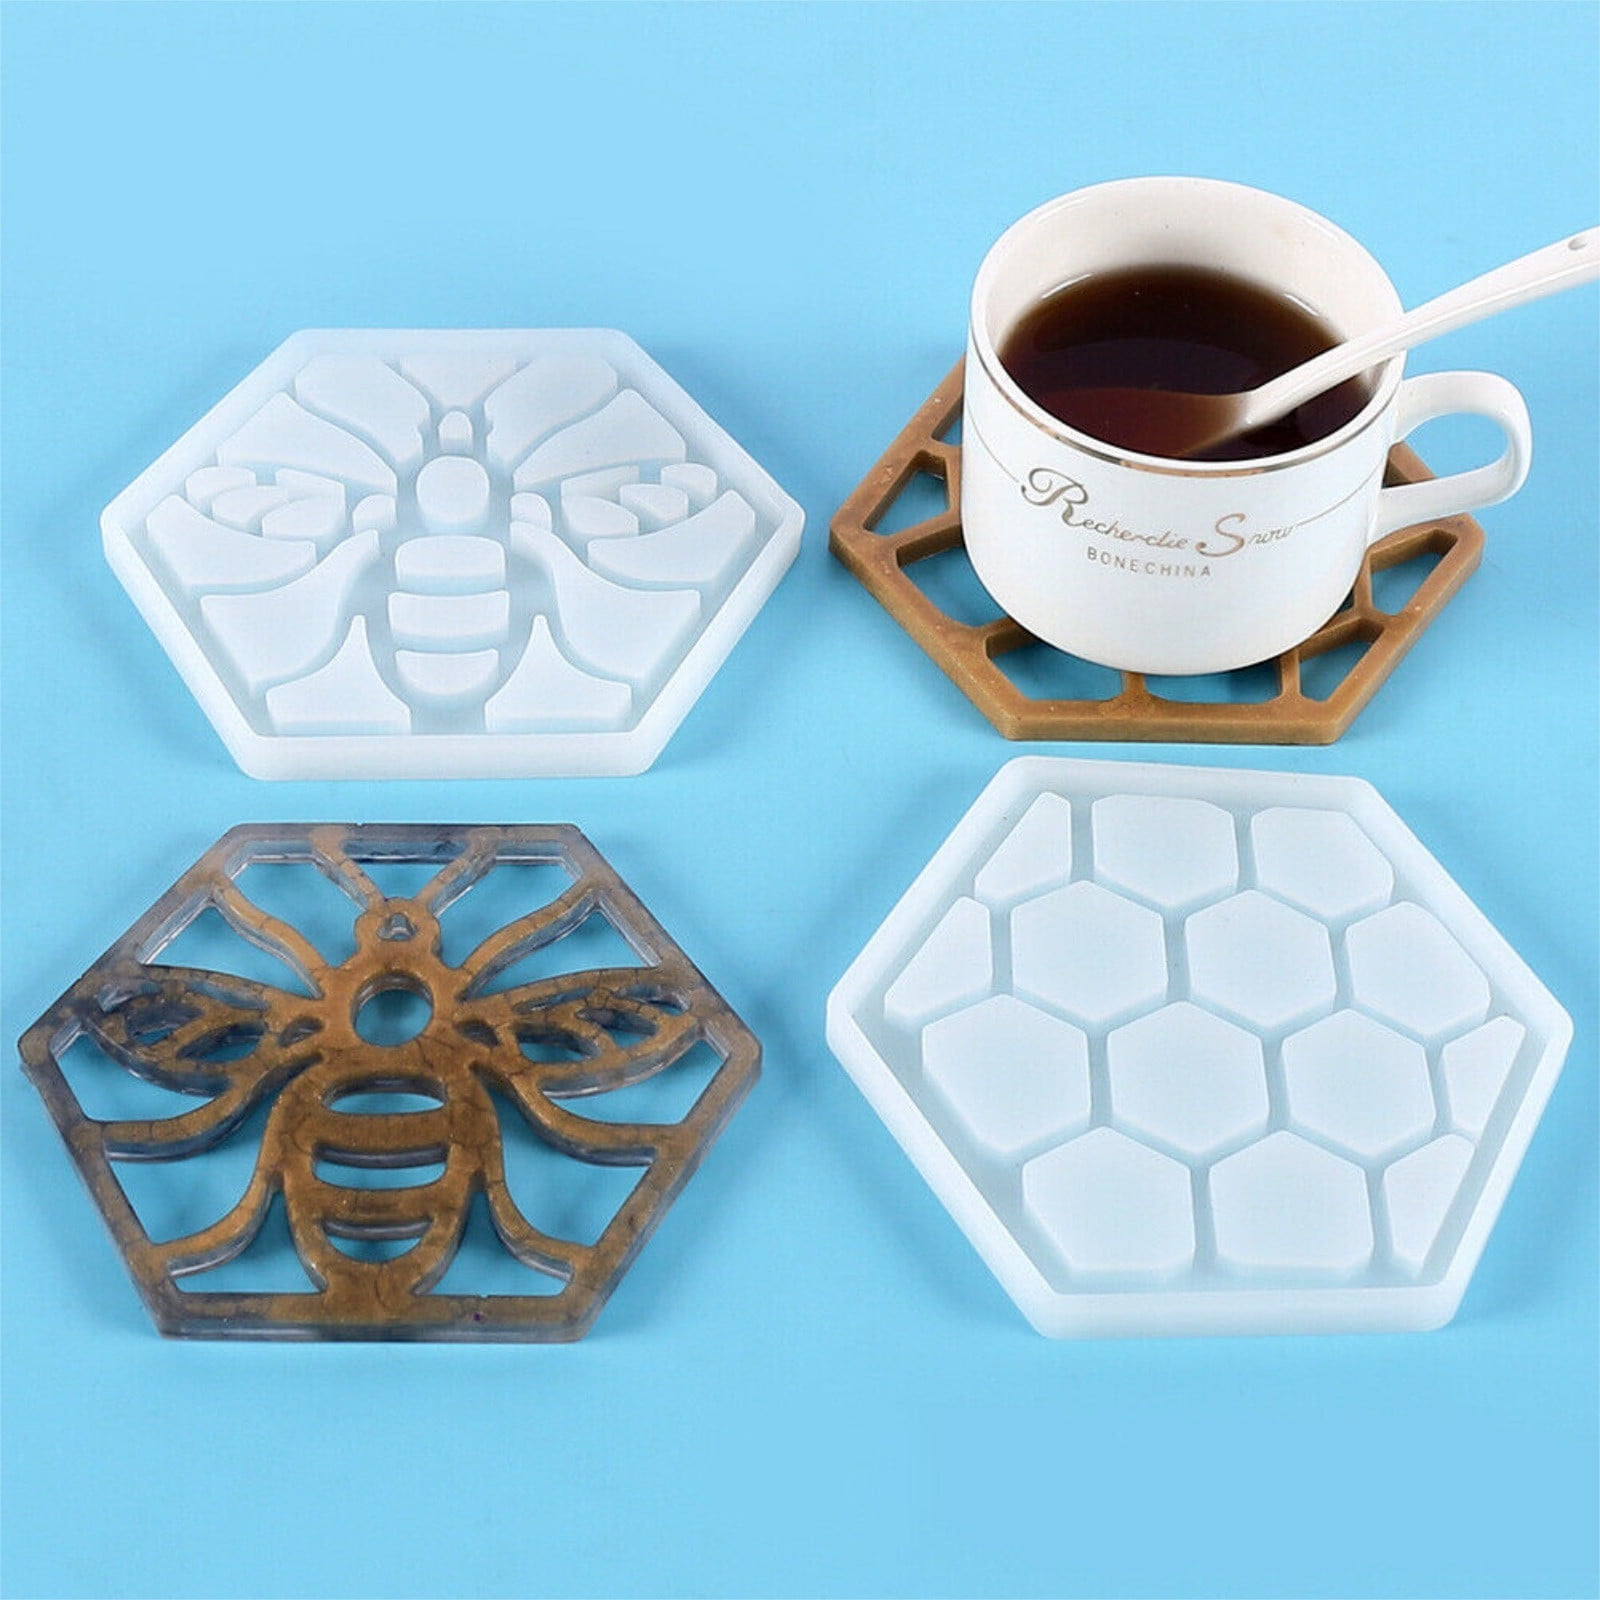  Tulsondai Honeybee Silicone Resin Mold, 4 Pieces Beehive Honey  Bee Honeycomb Drip Edging Frame, Resin Coaster Mold, Resin Silicone Kit  Bundle Clearance with Storage Box Mold, Home Decoration : Arts, Crafts